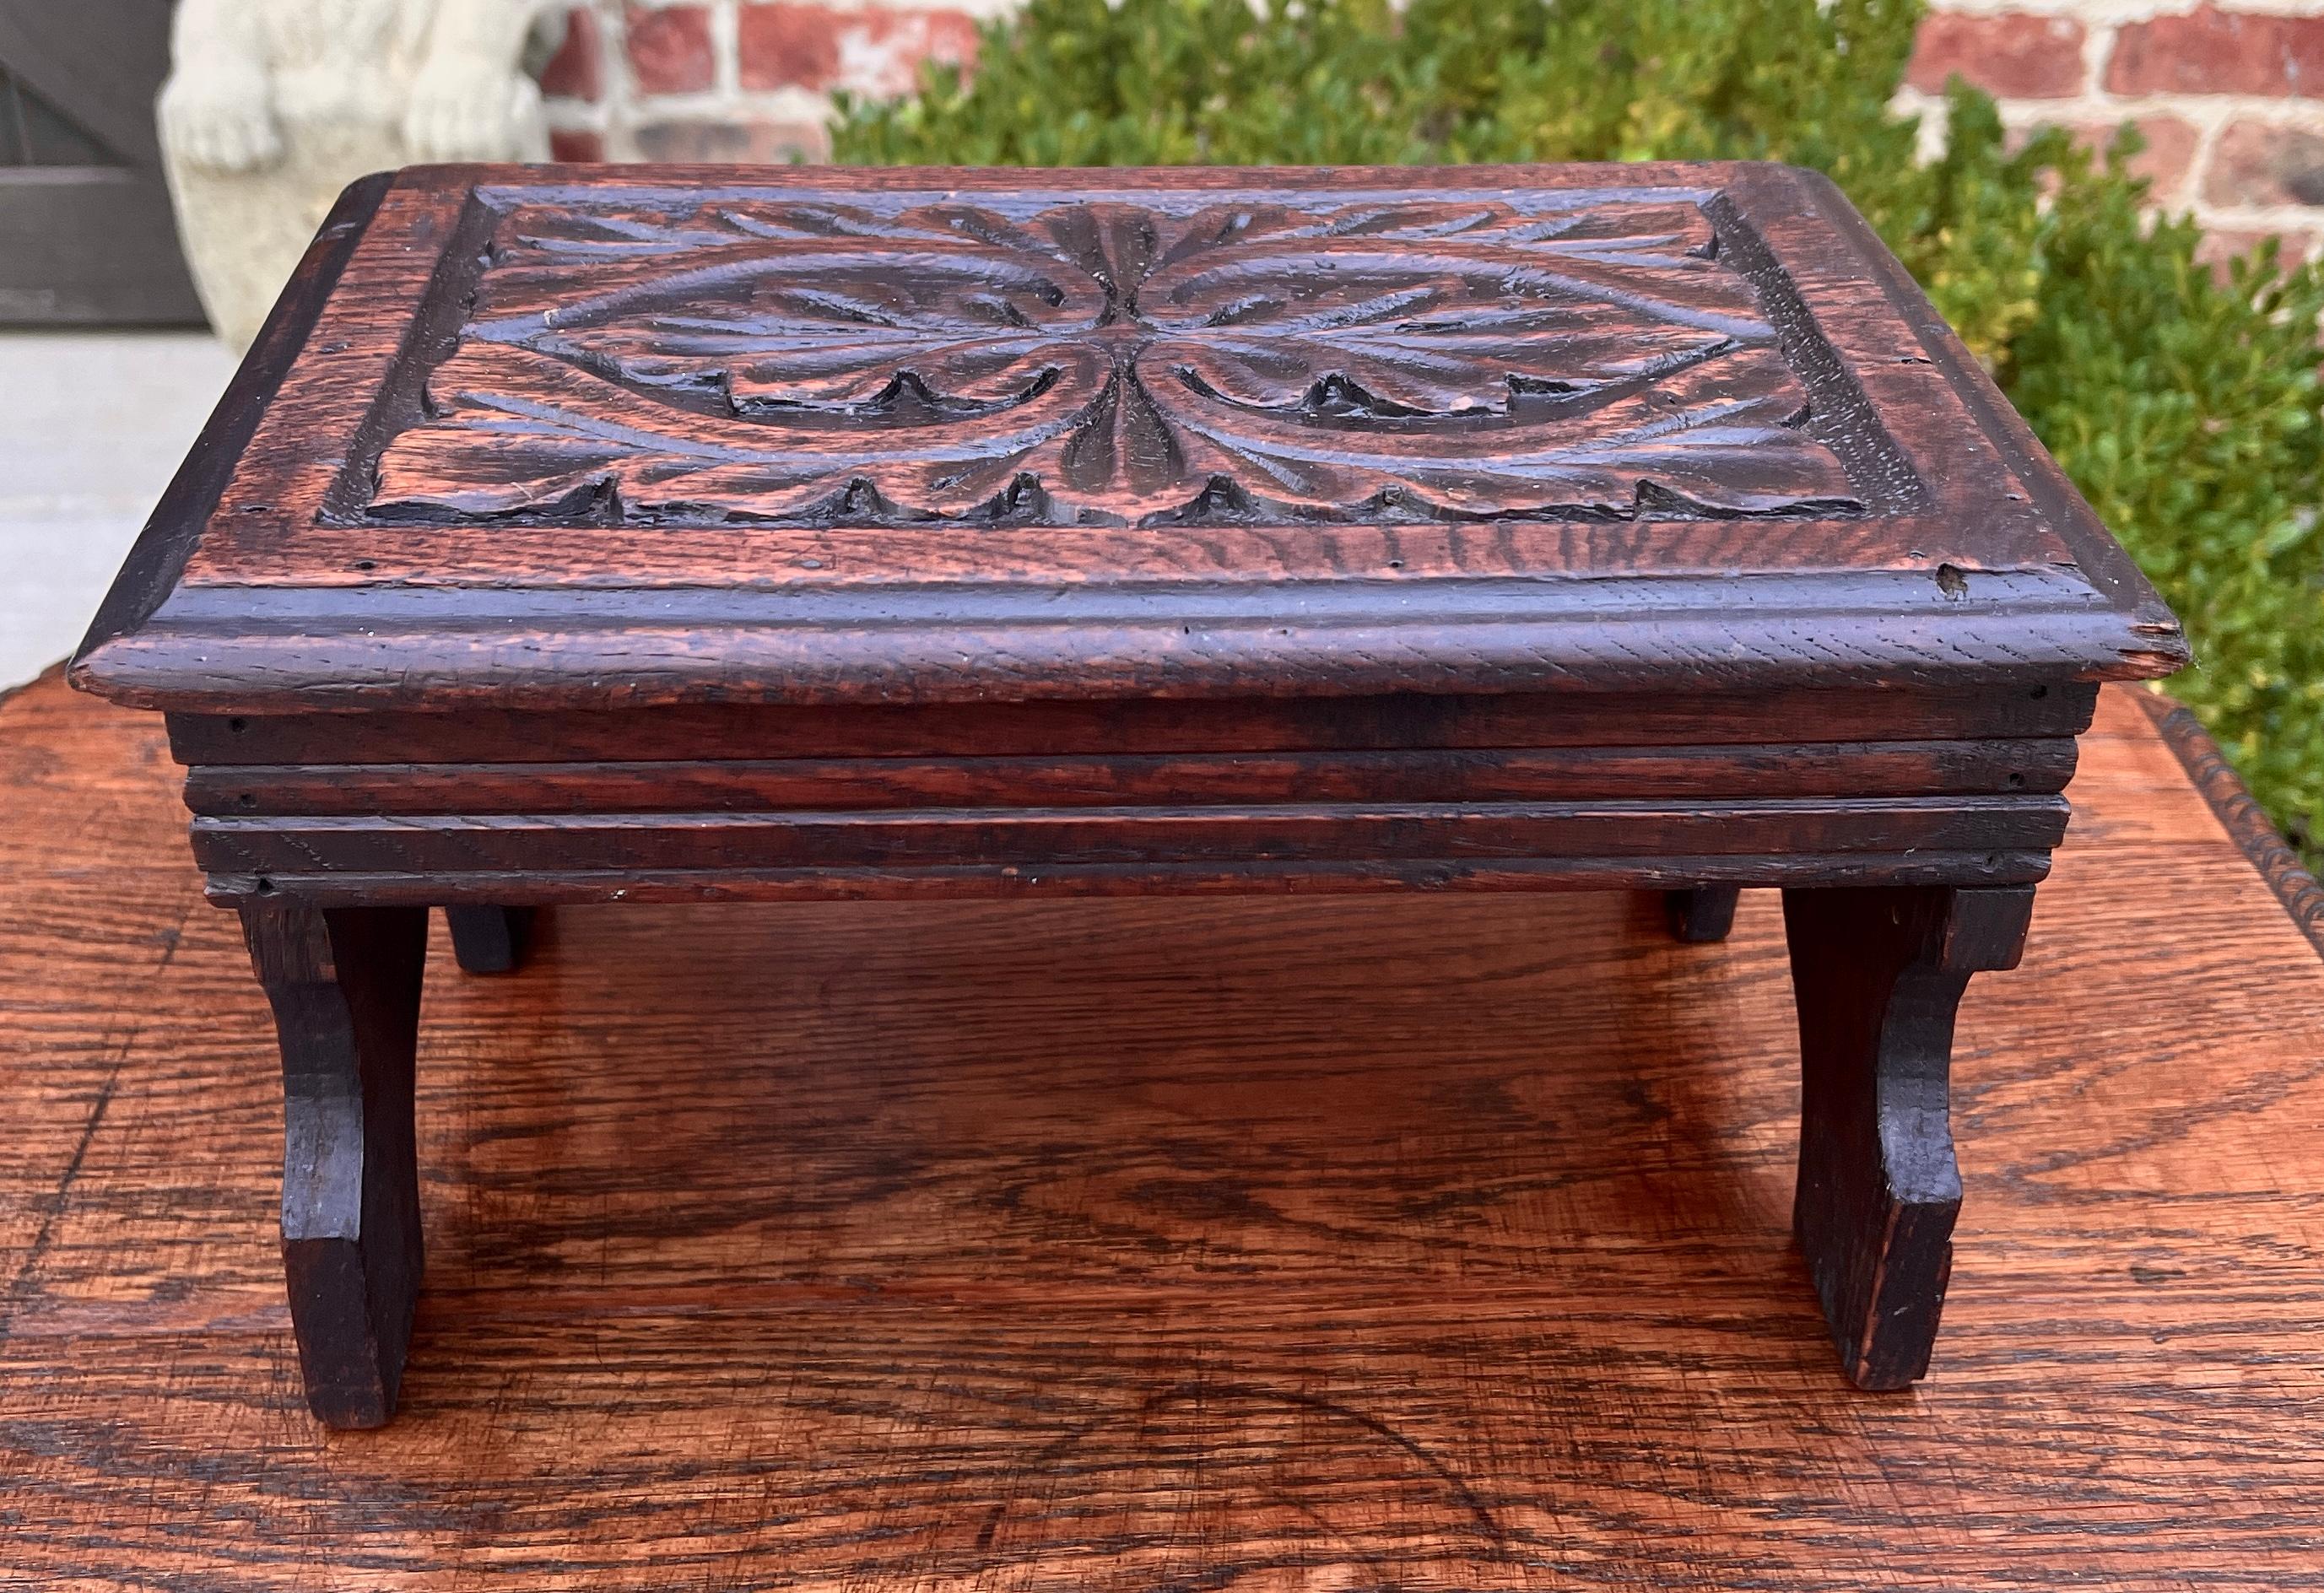 Jacobean Antique English Kettle Stand Small Footstool Bench Carved Oak c. 1920s-30s For Sale